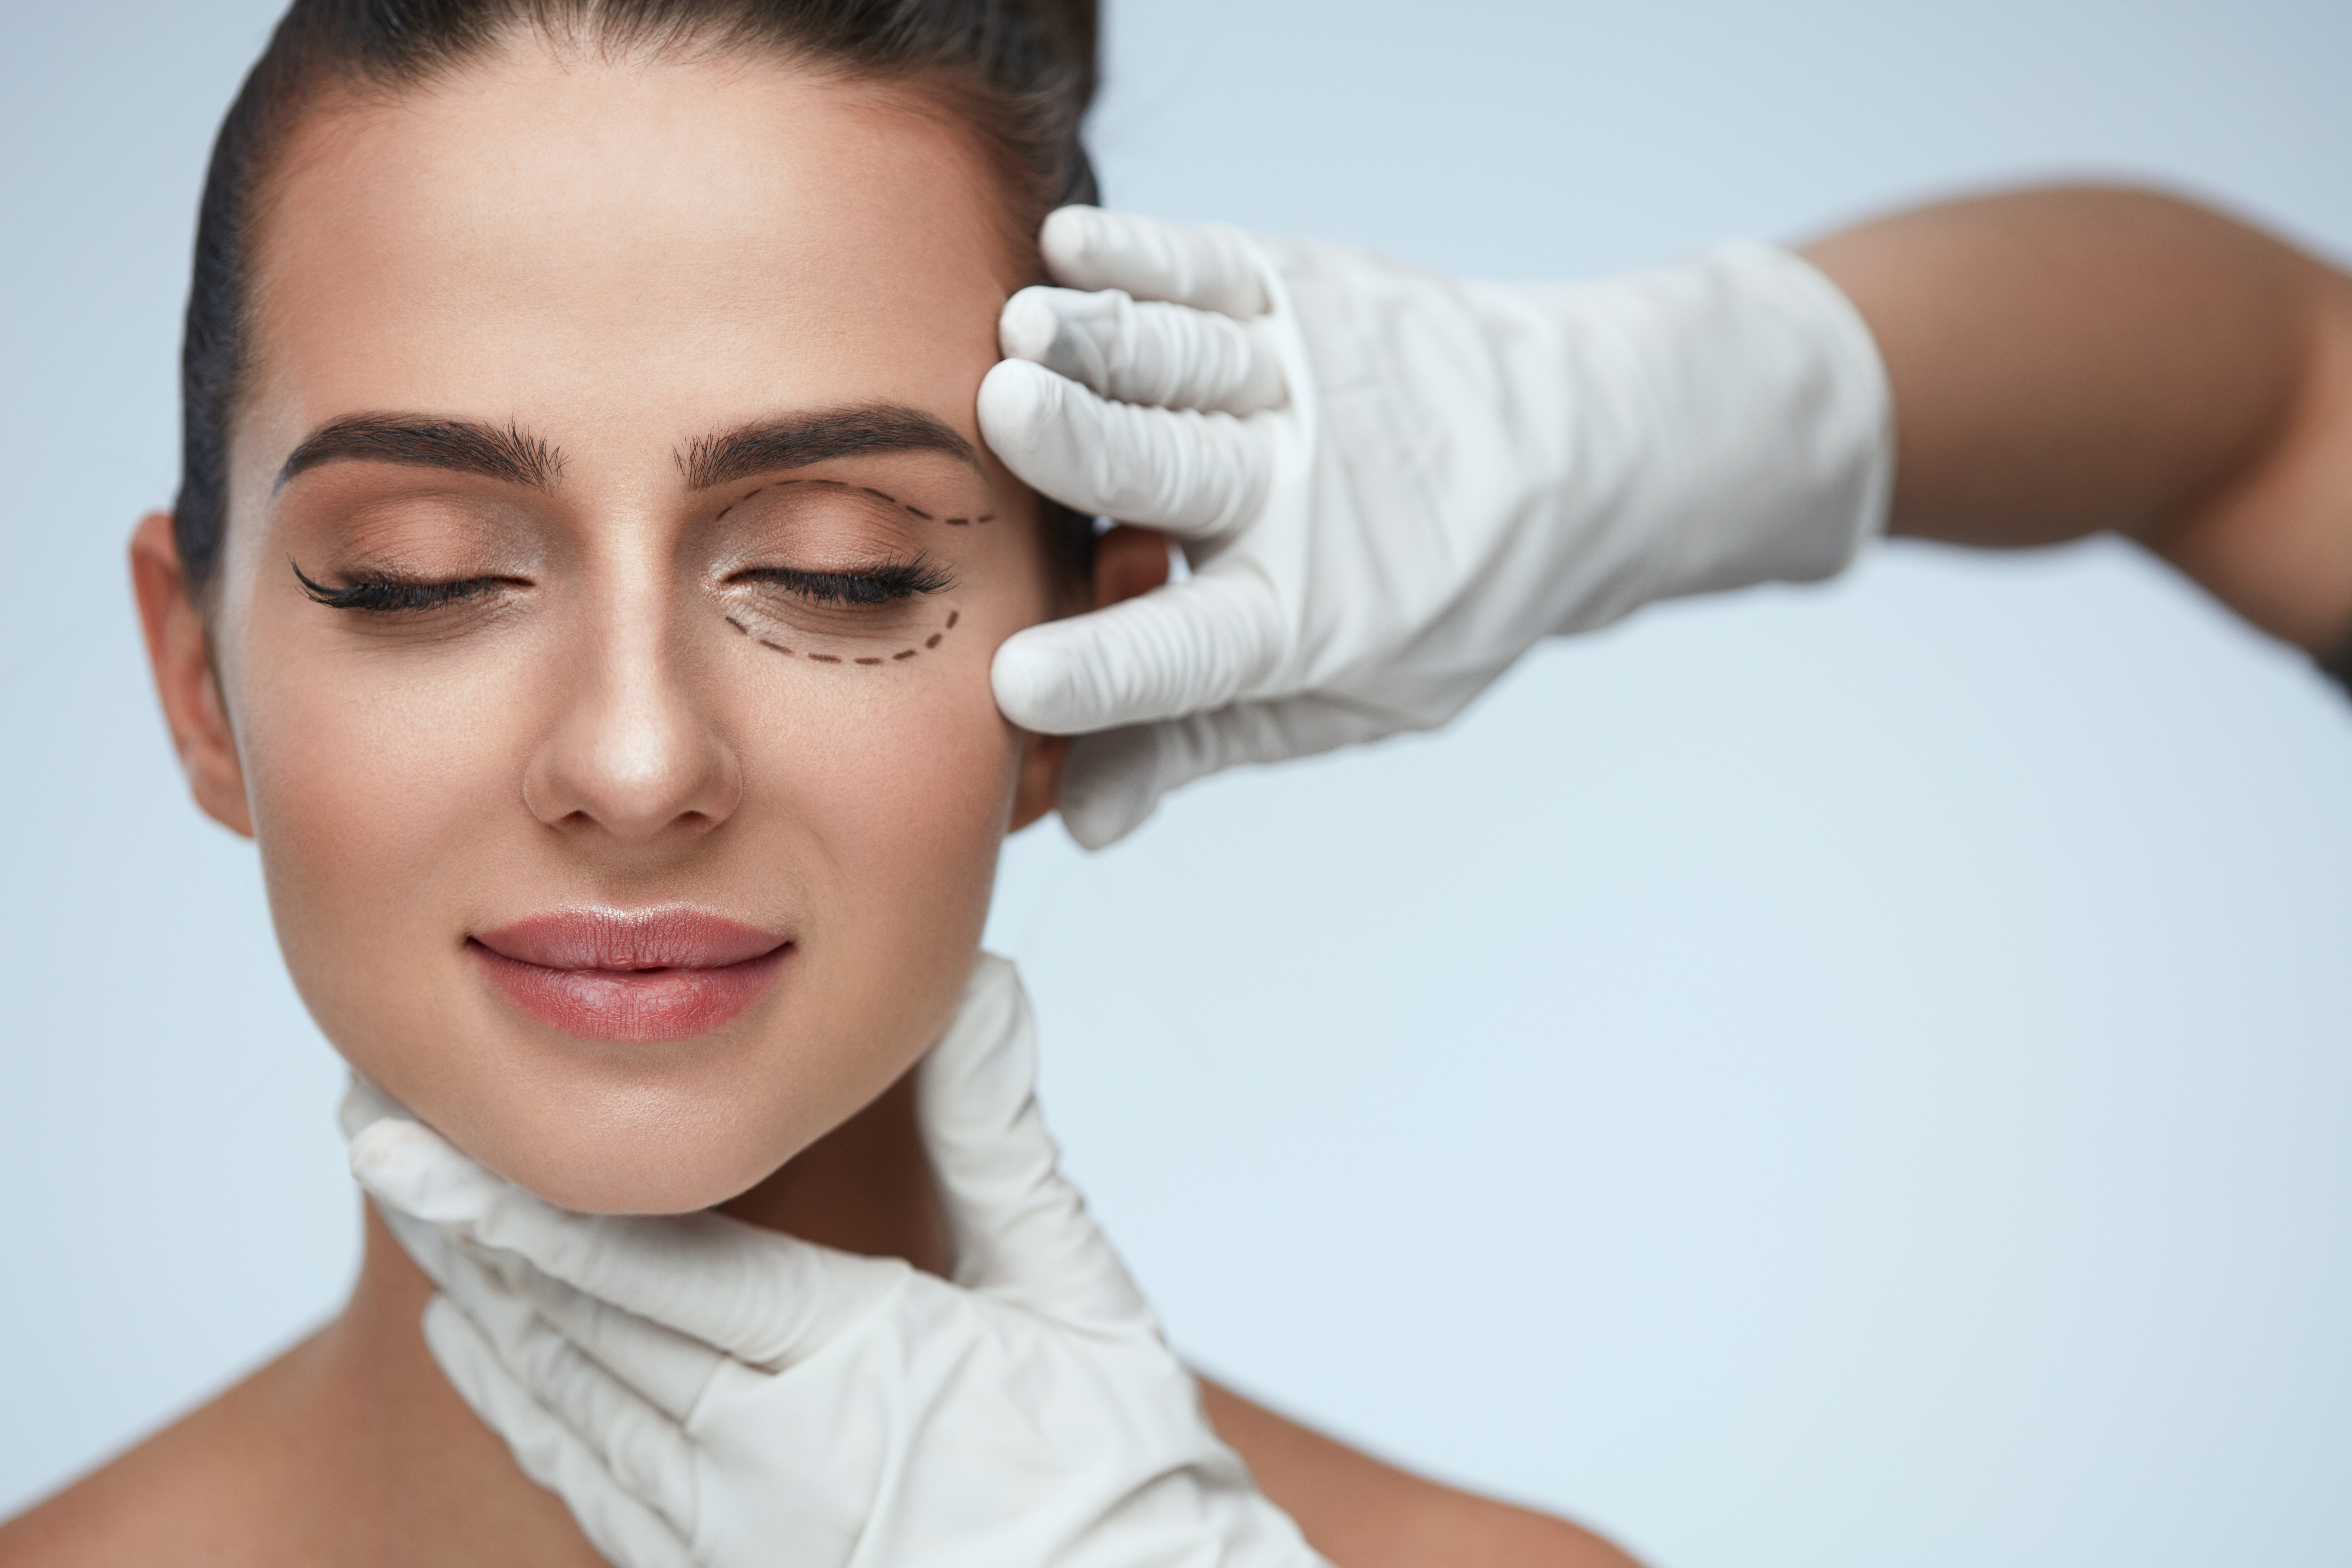 Head shot of woman preparing for eyelid lift procedure with the surgeon touching the woman's face and eyelid.